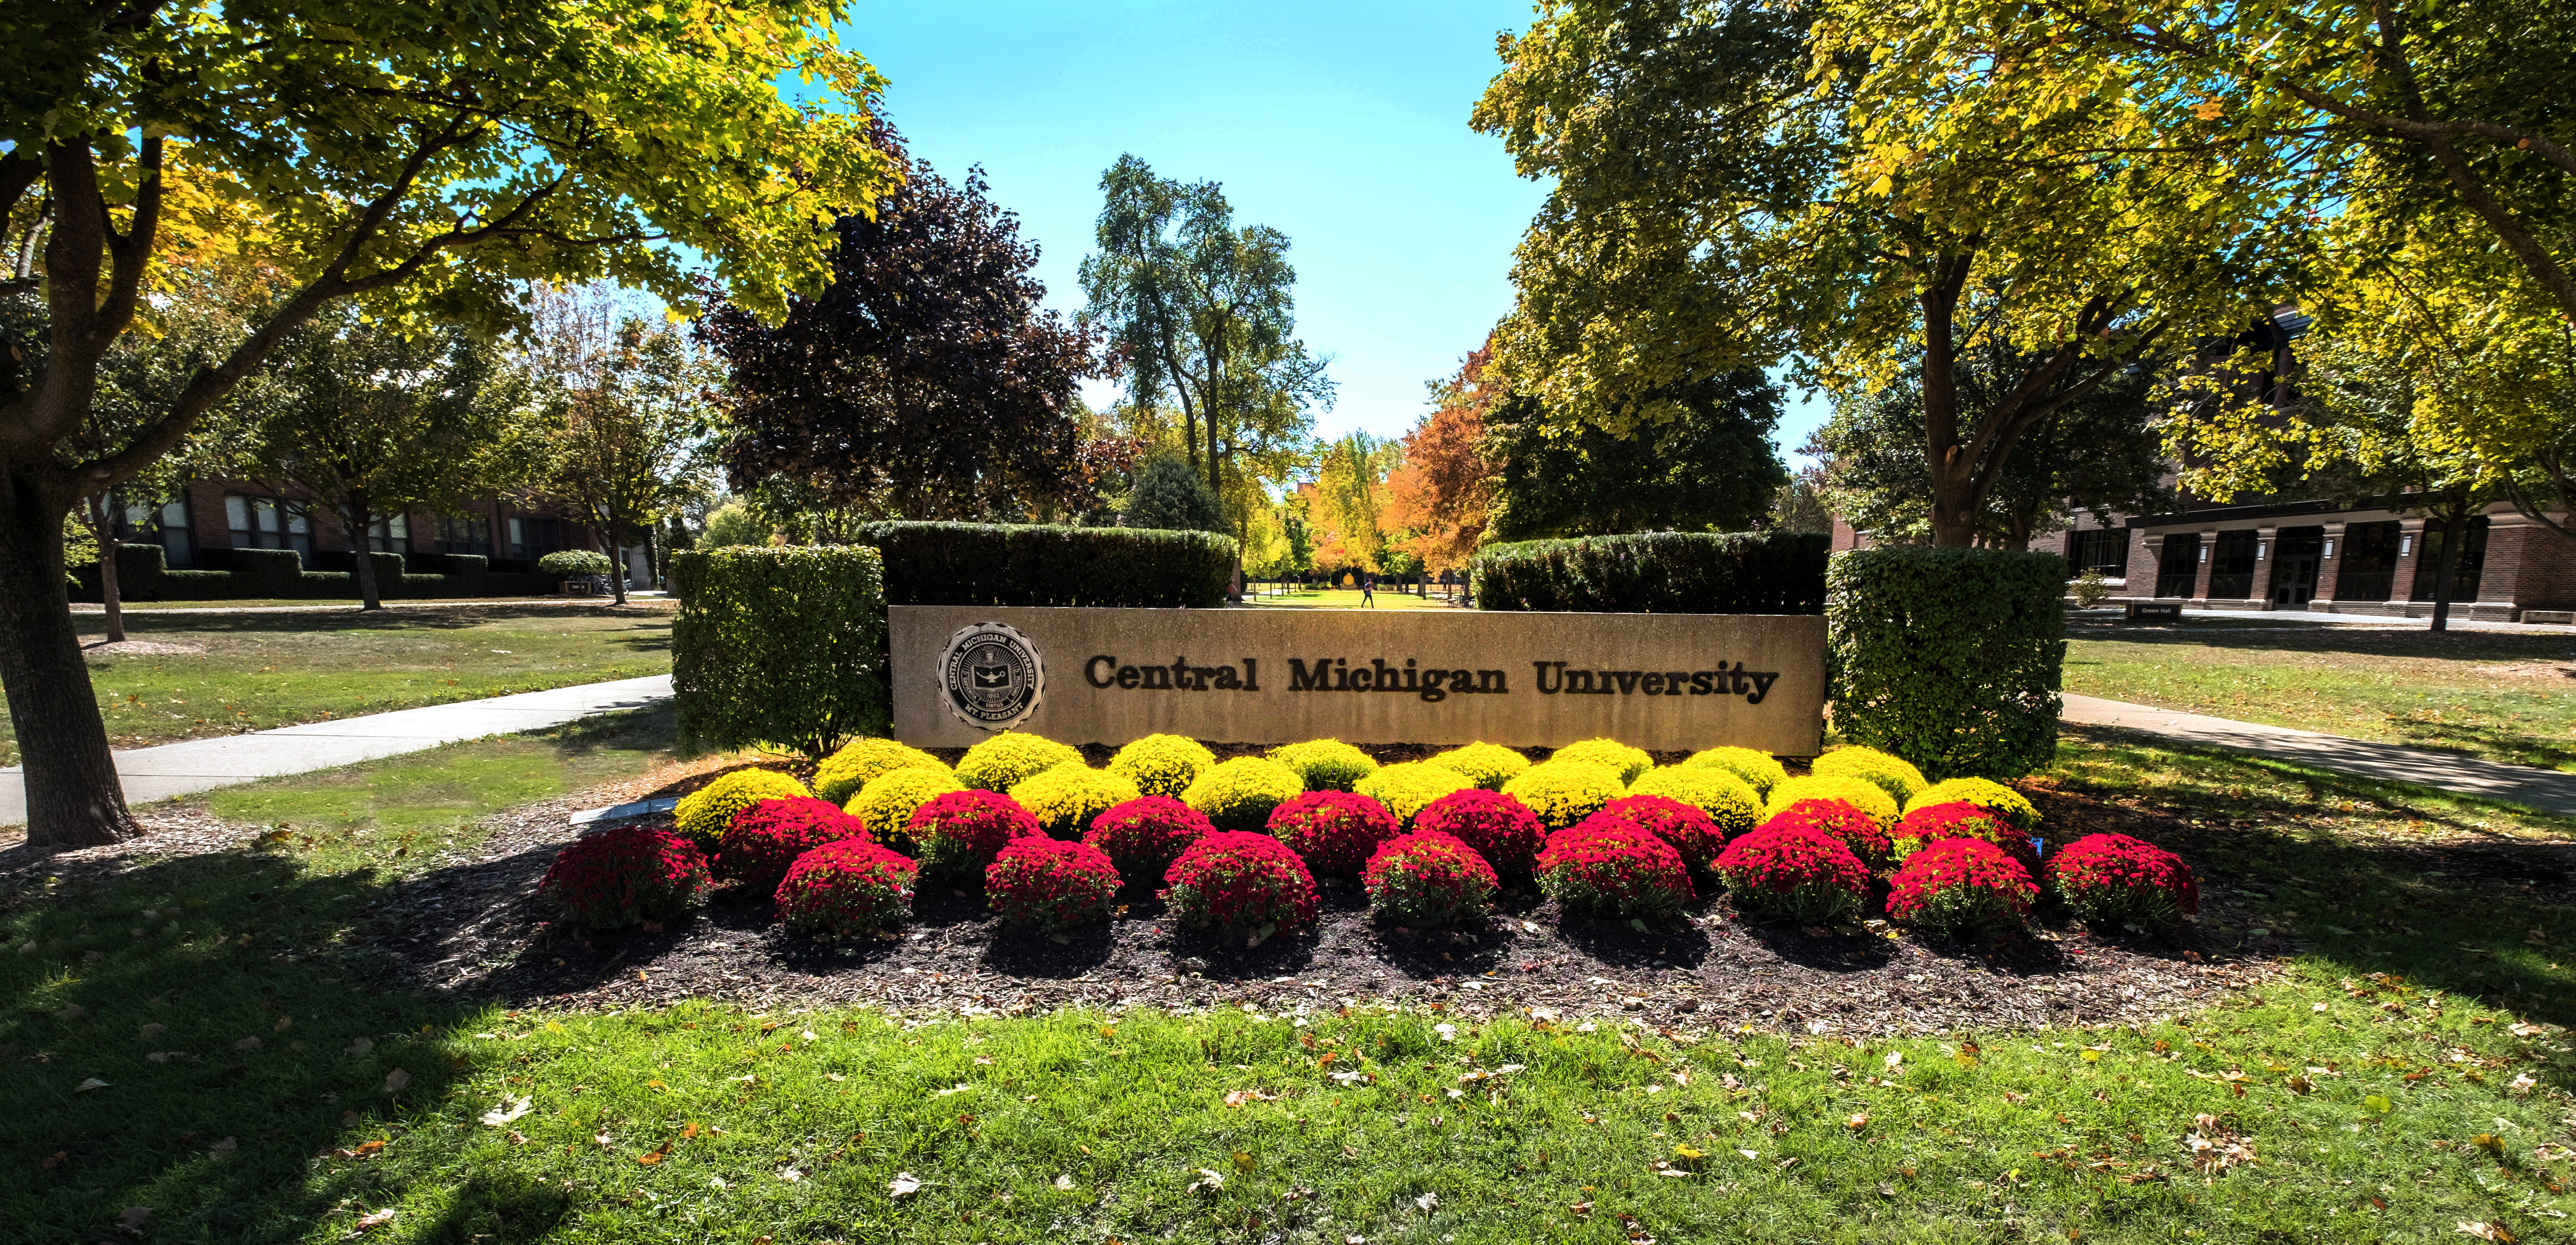 Jobs for College Students at Central Michigan University